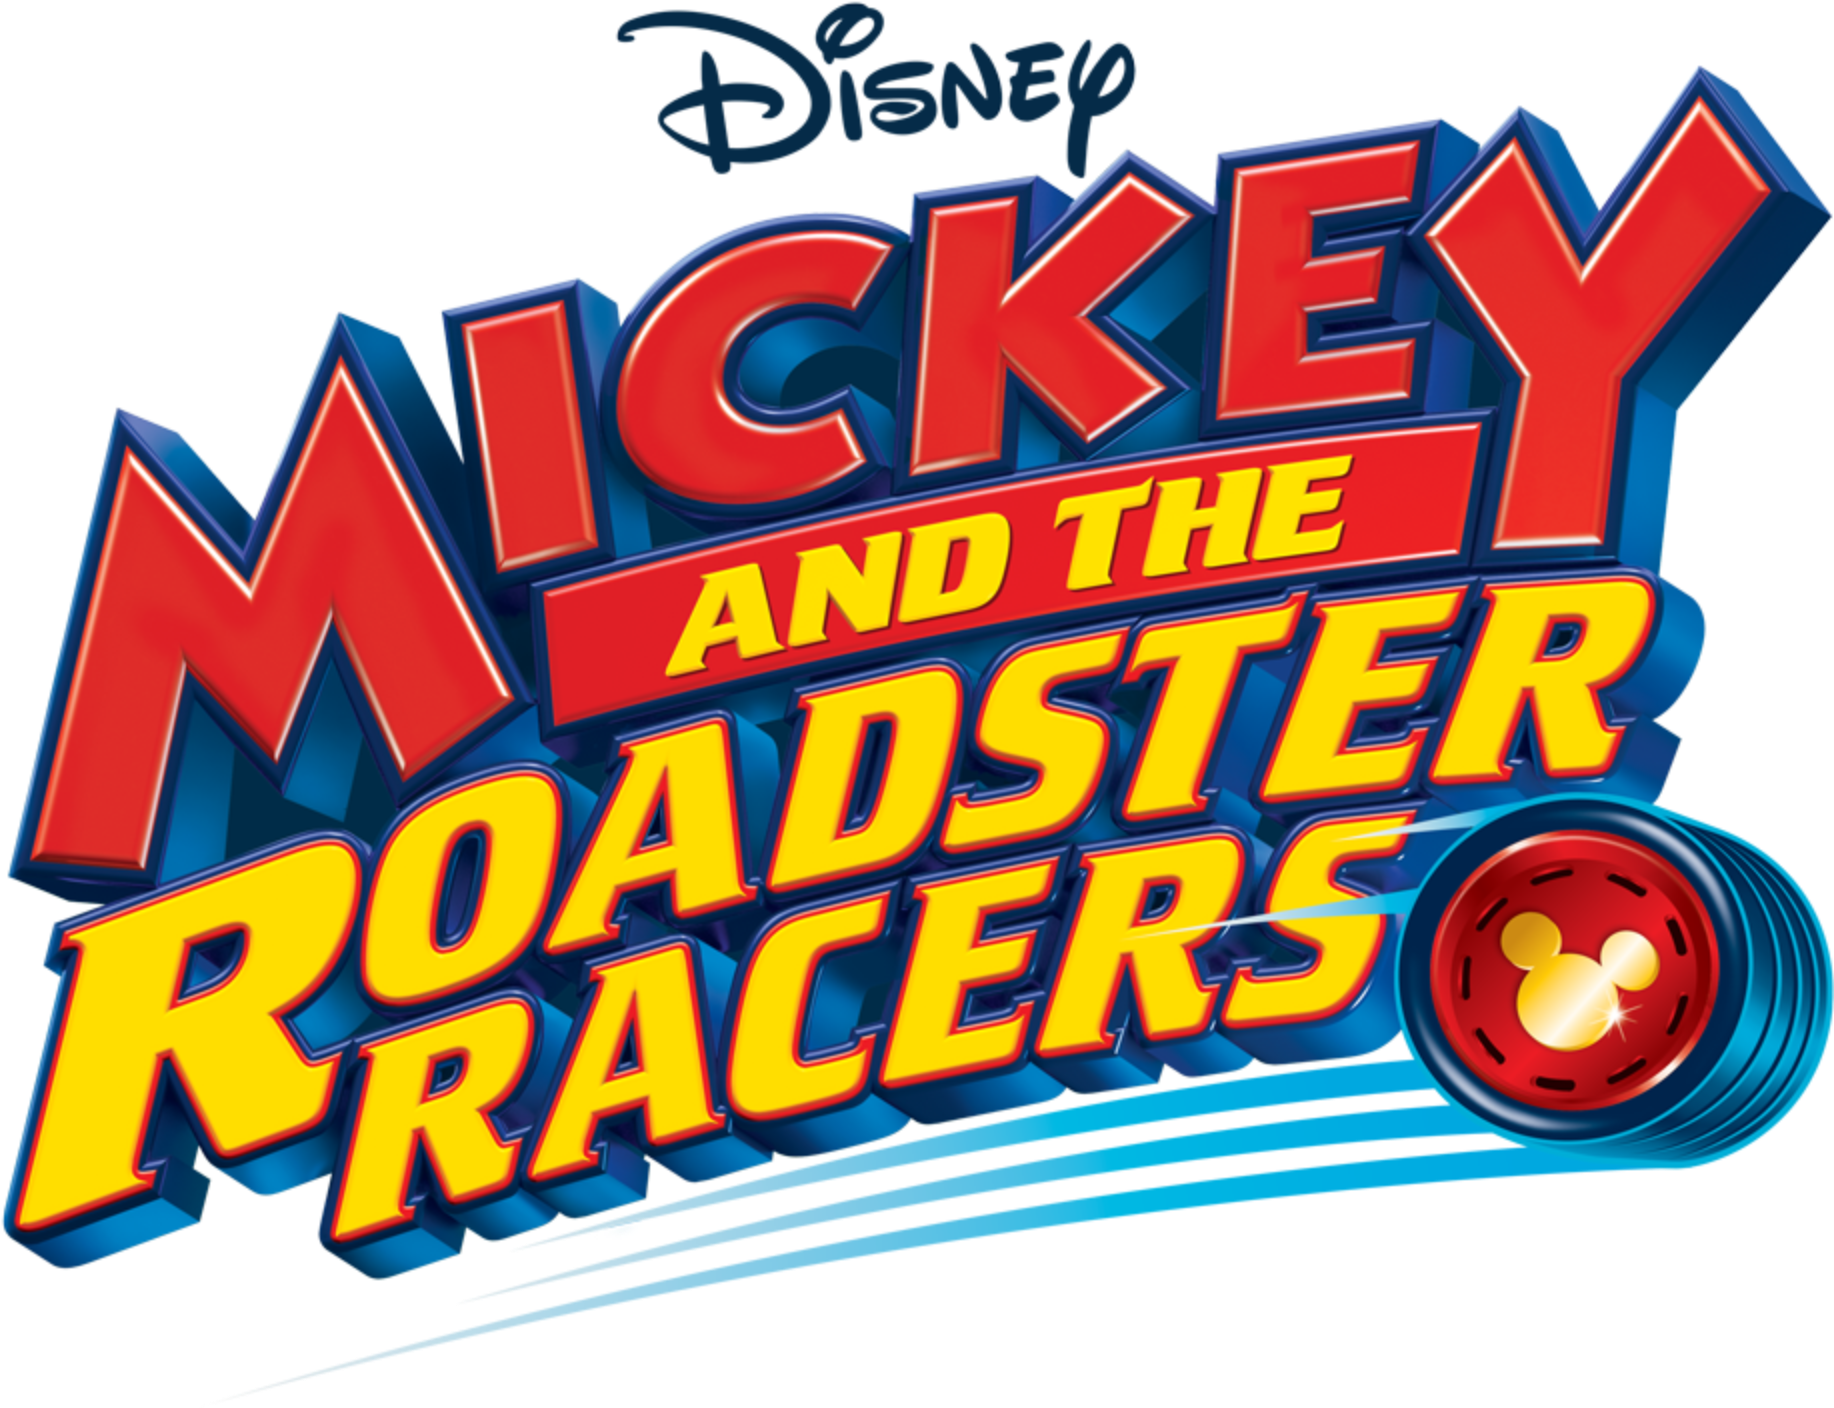 Mickey and the Roadster Racers (11 DVDs Box Set)